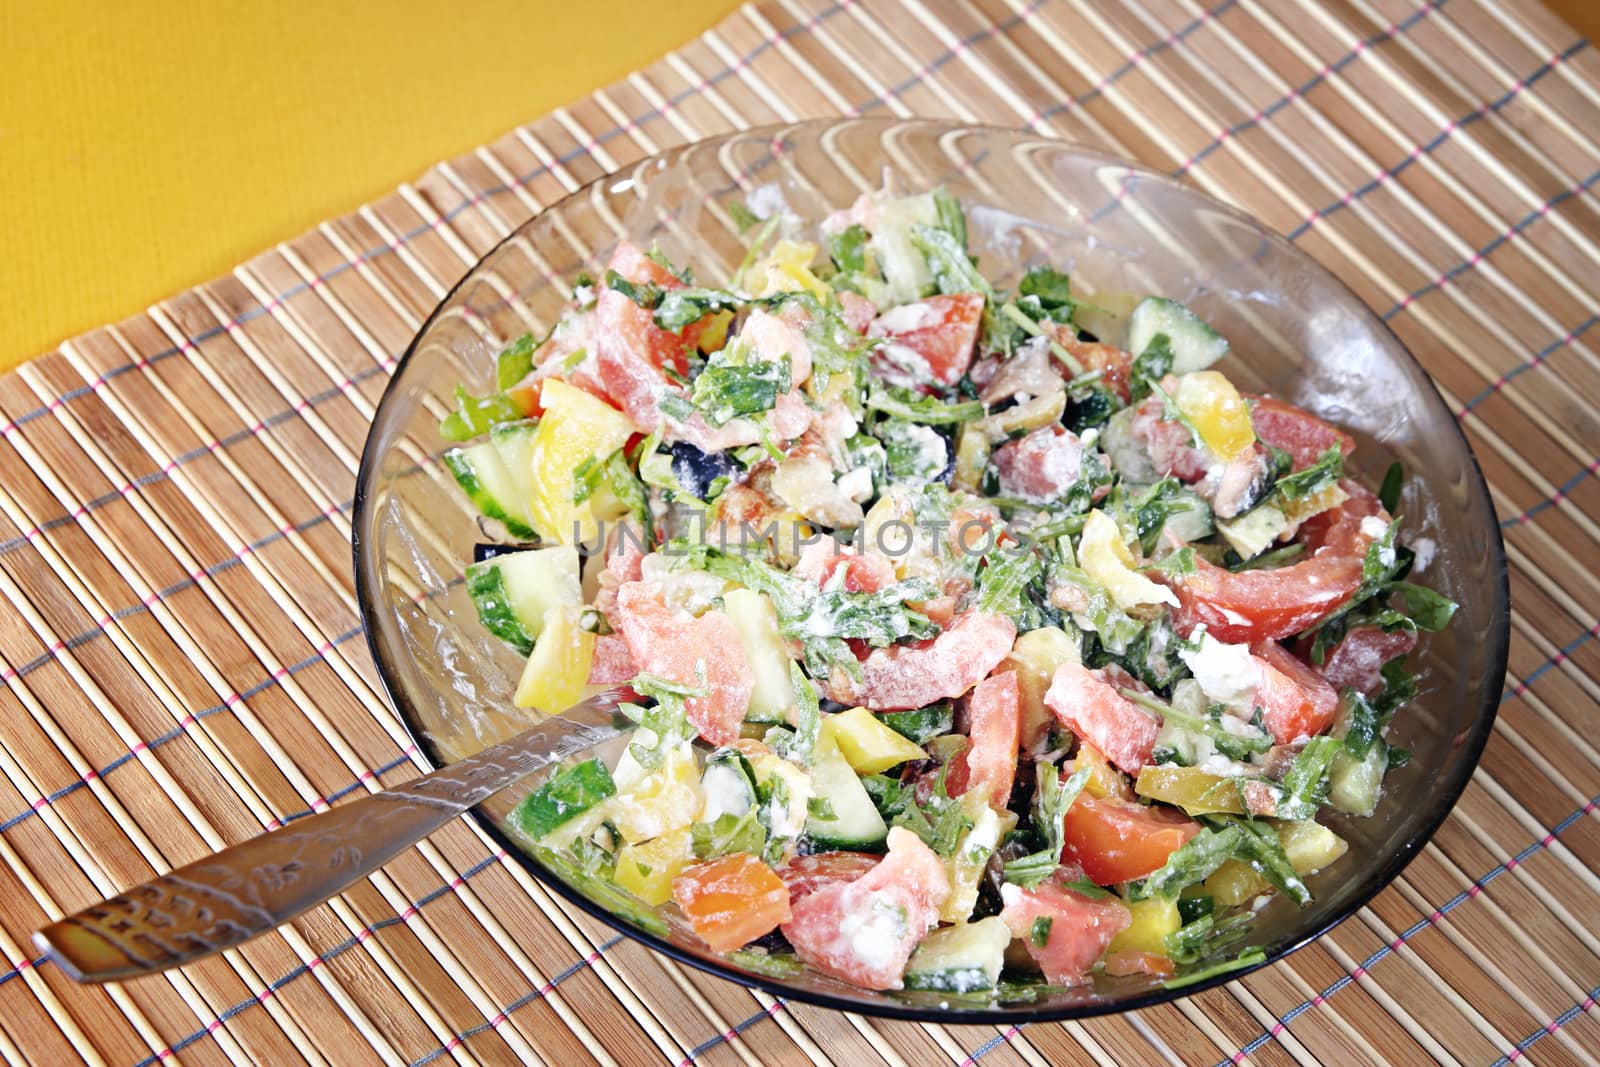 Healthy salad with vegetables and cheese